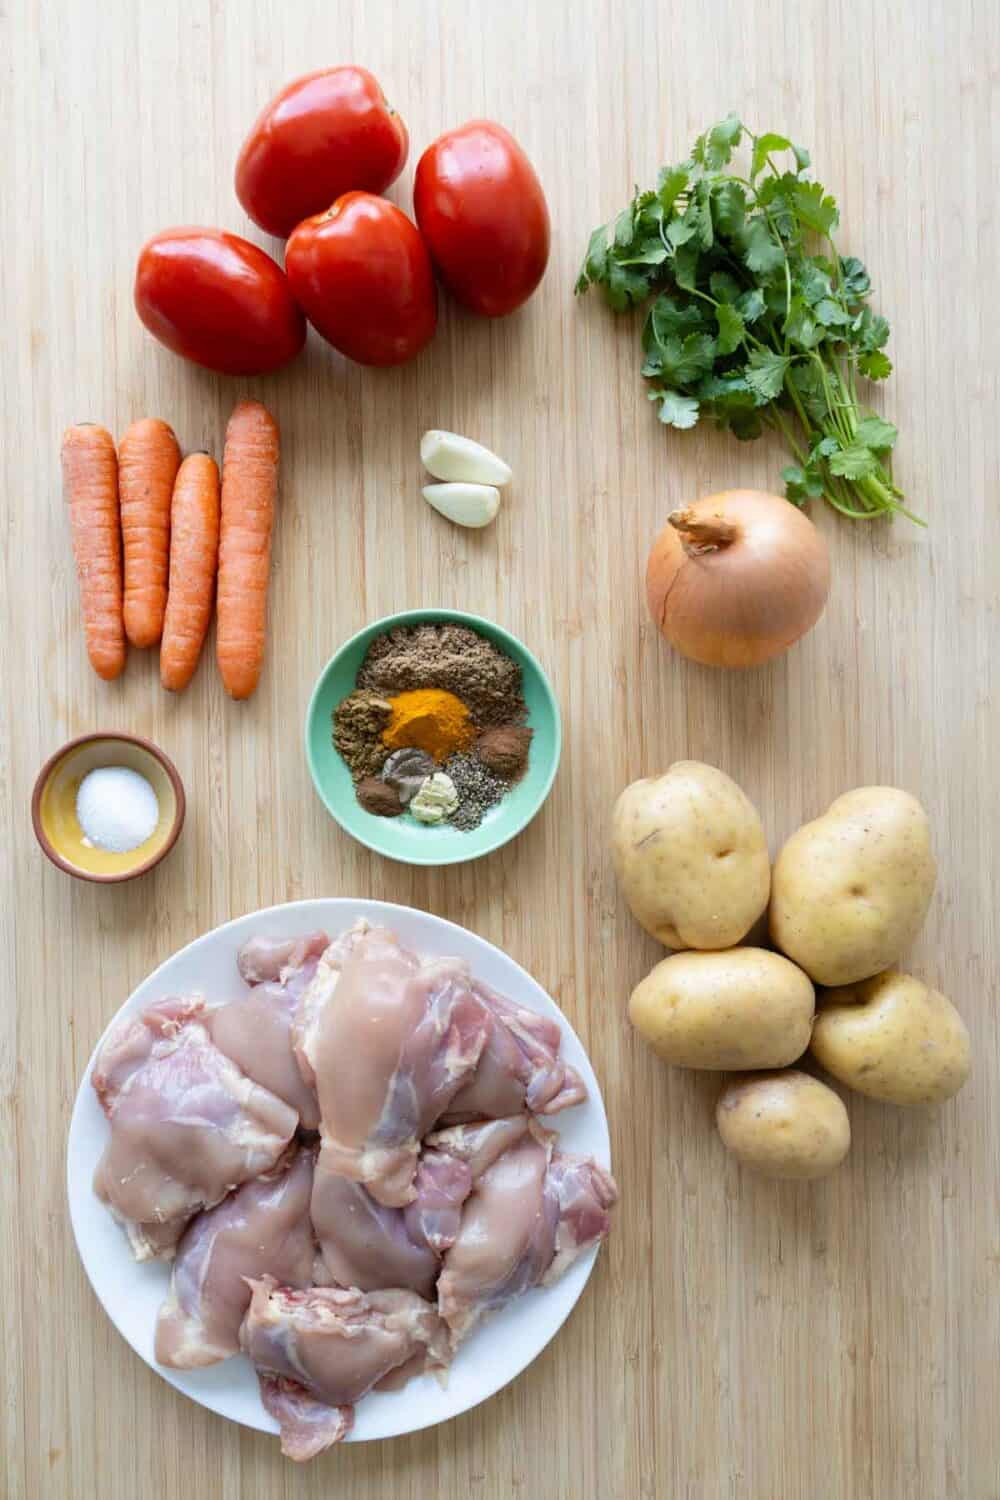 All ingredients necessary to make Mauritian Chicken Curry laid out on a kitchen counter.